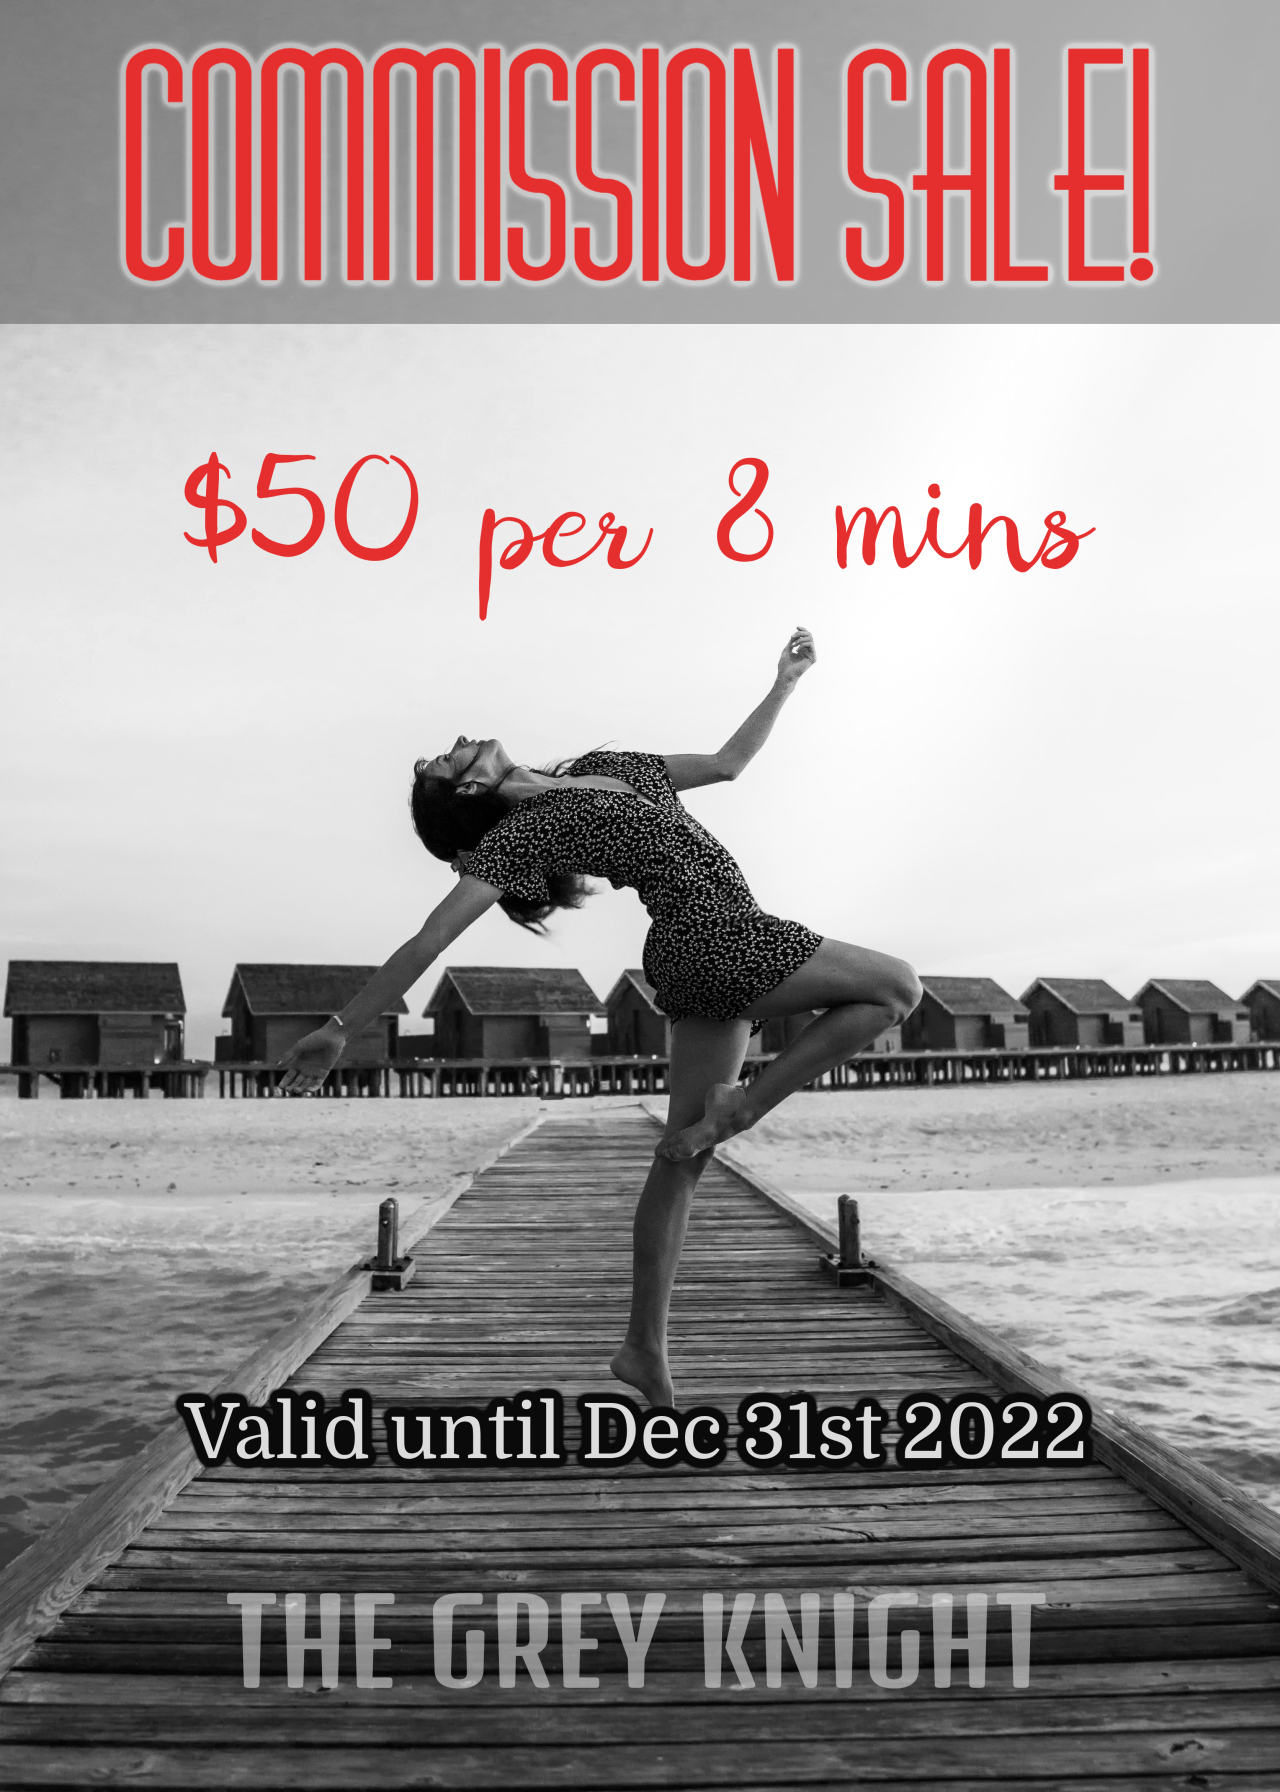 Big sale! From now until the end of the year, 50 dollars per 8 minutes, whatever